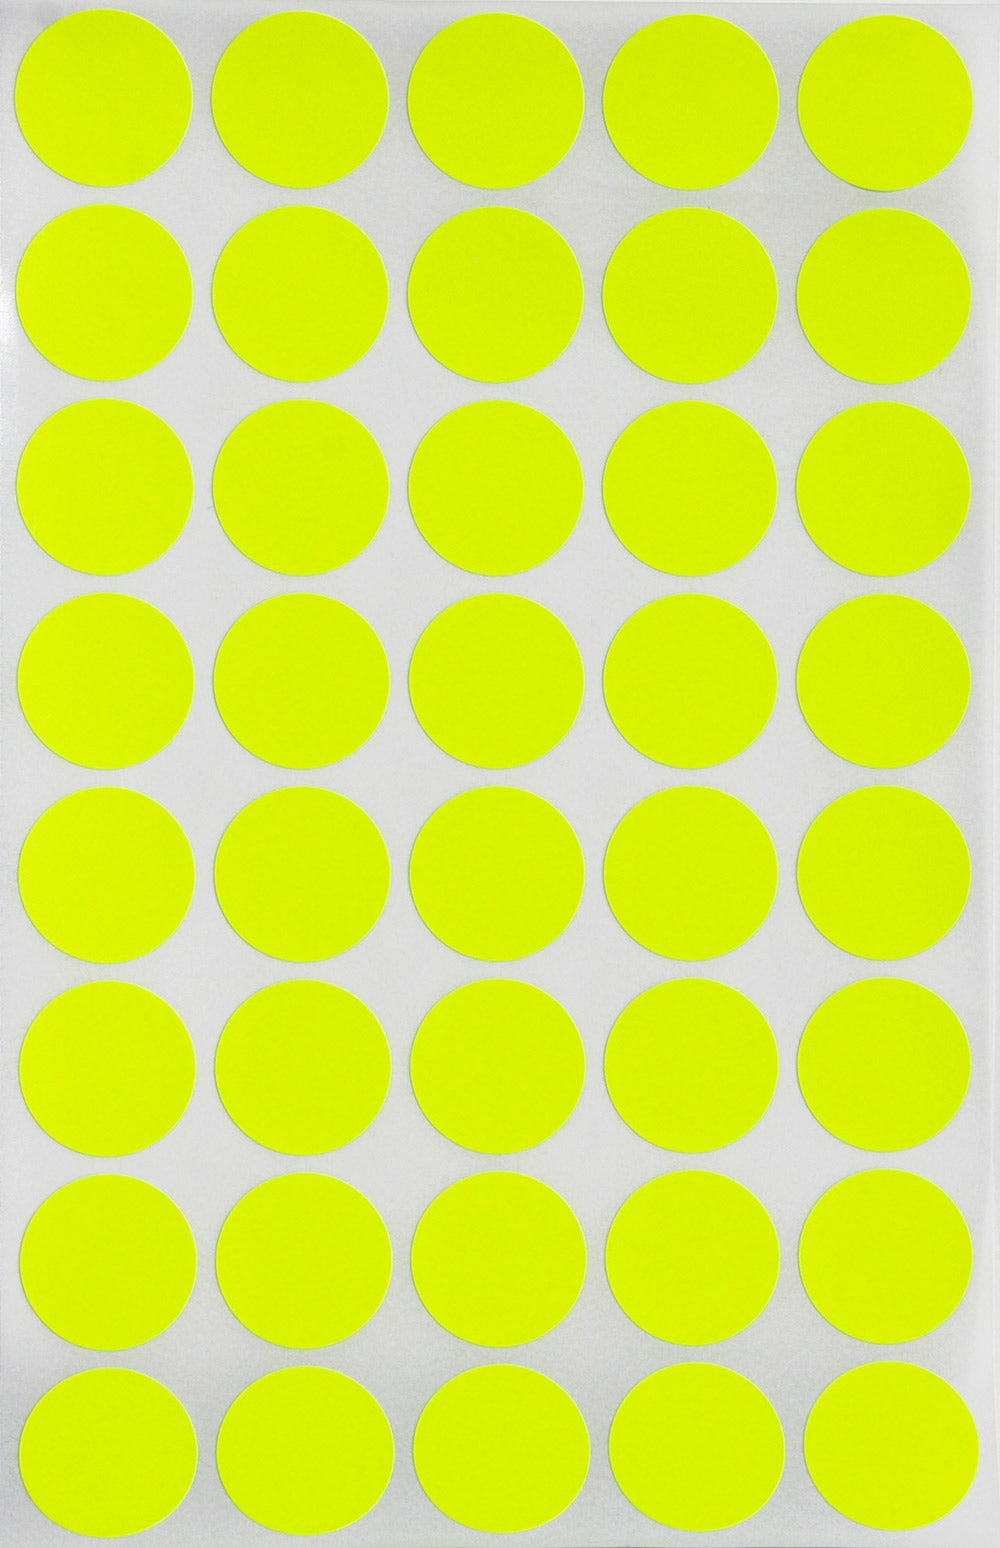 Round Labels 3/4 inch Colored Dot Stickers 19mm in Neon Green - 1000 Pack  by Royal Green